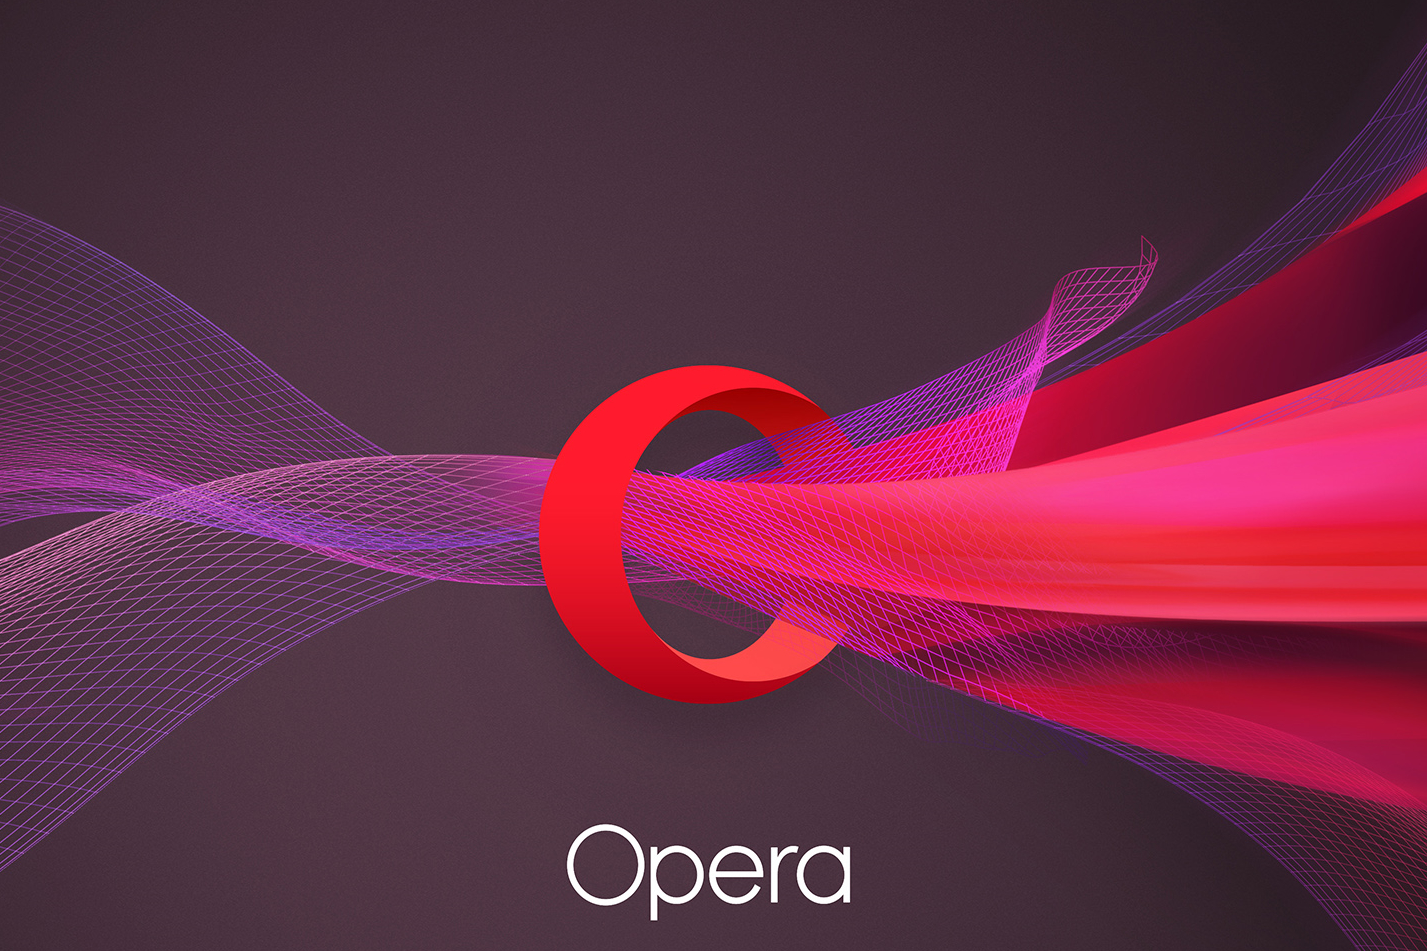 The most important features of Opera browser